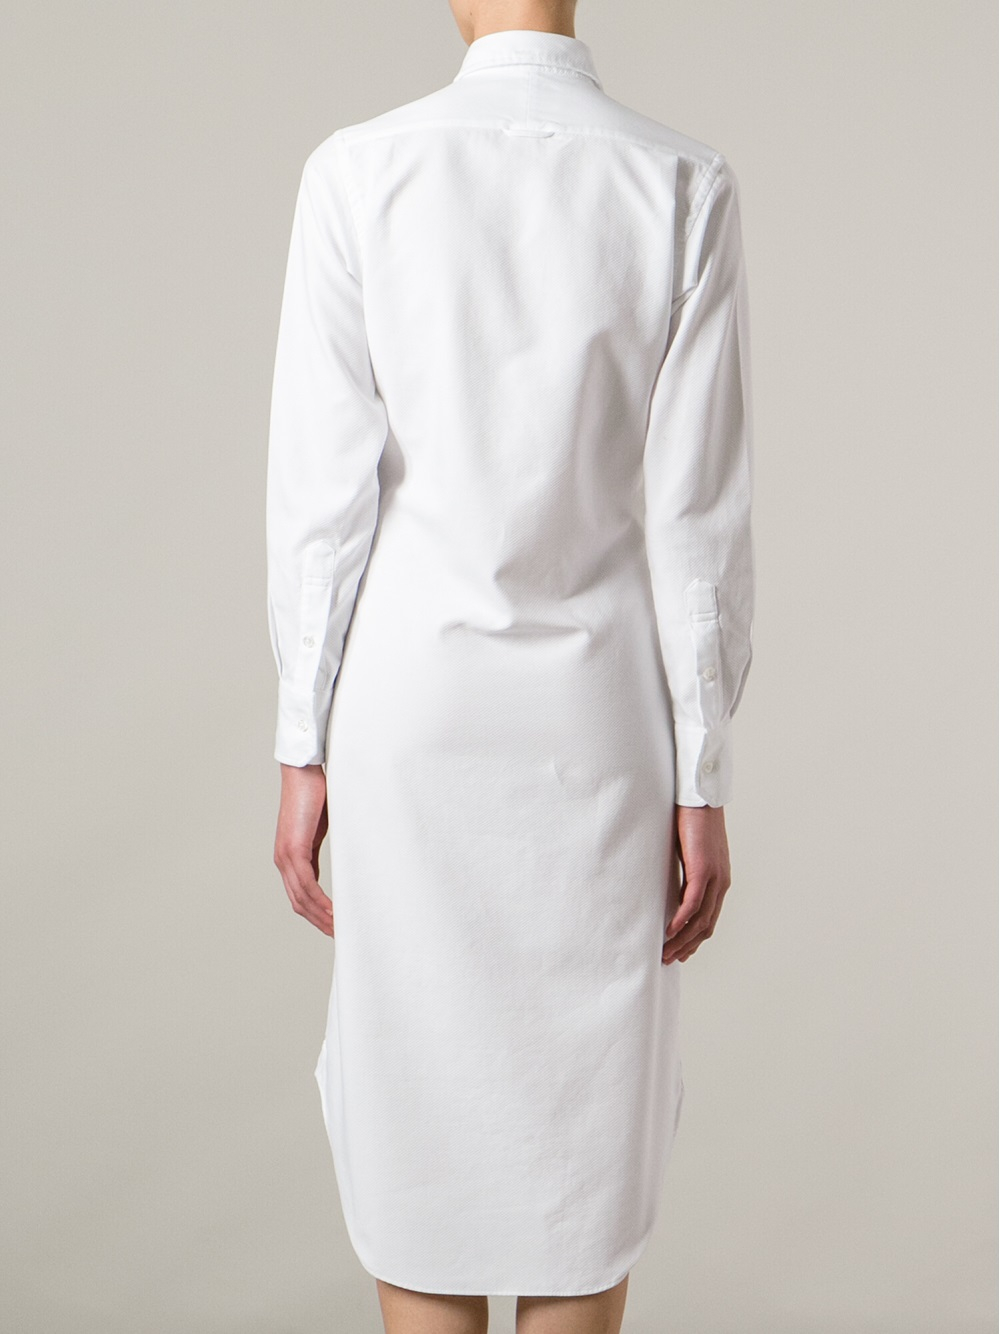 Lyst - Thom Browne Knee Length Shirt Dress in White